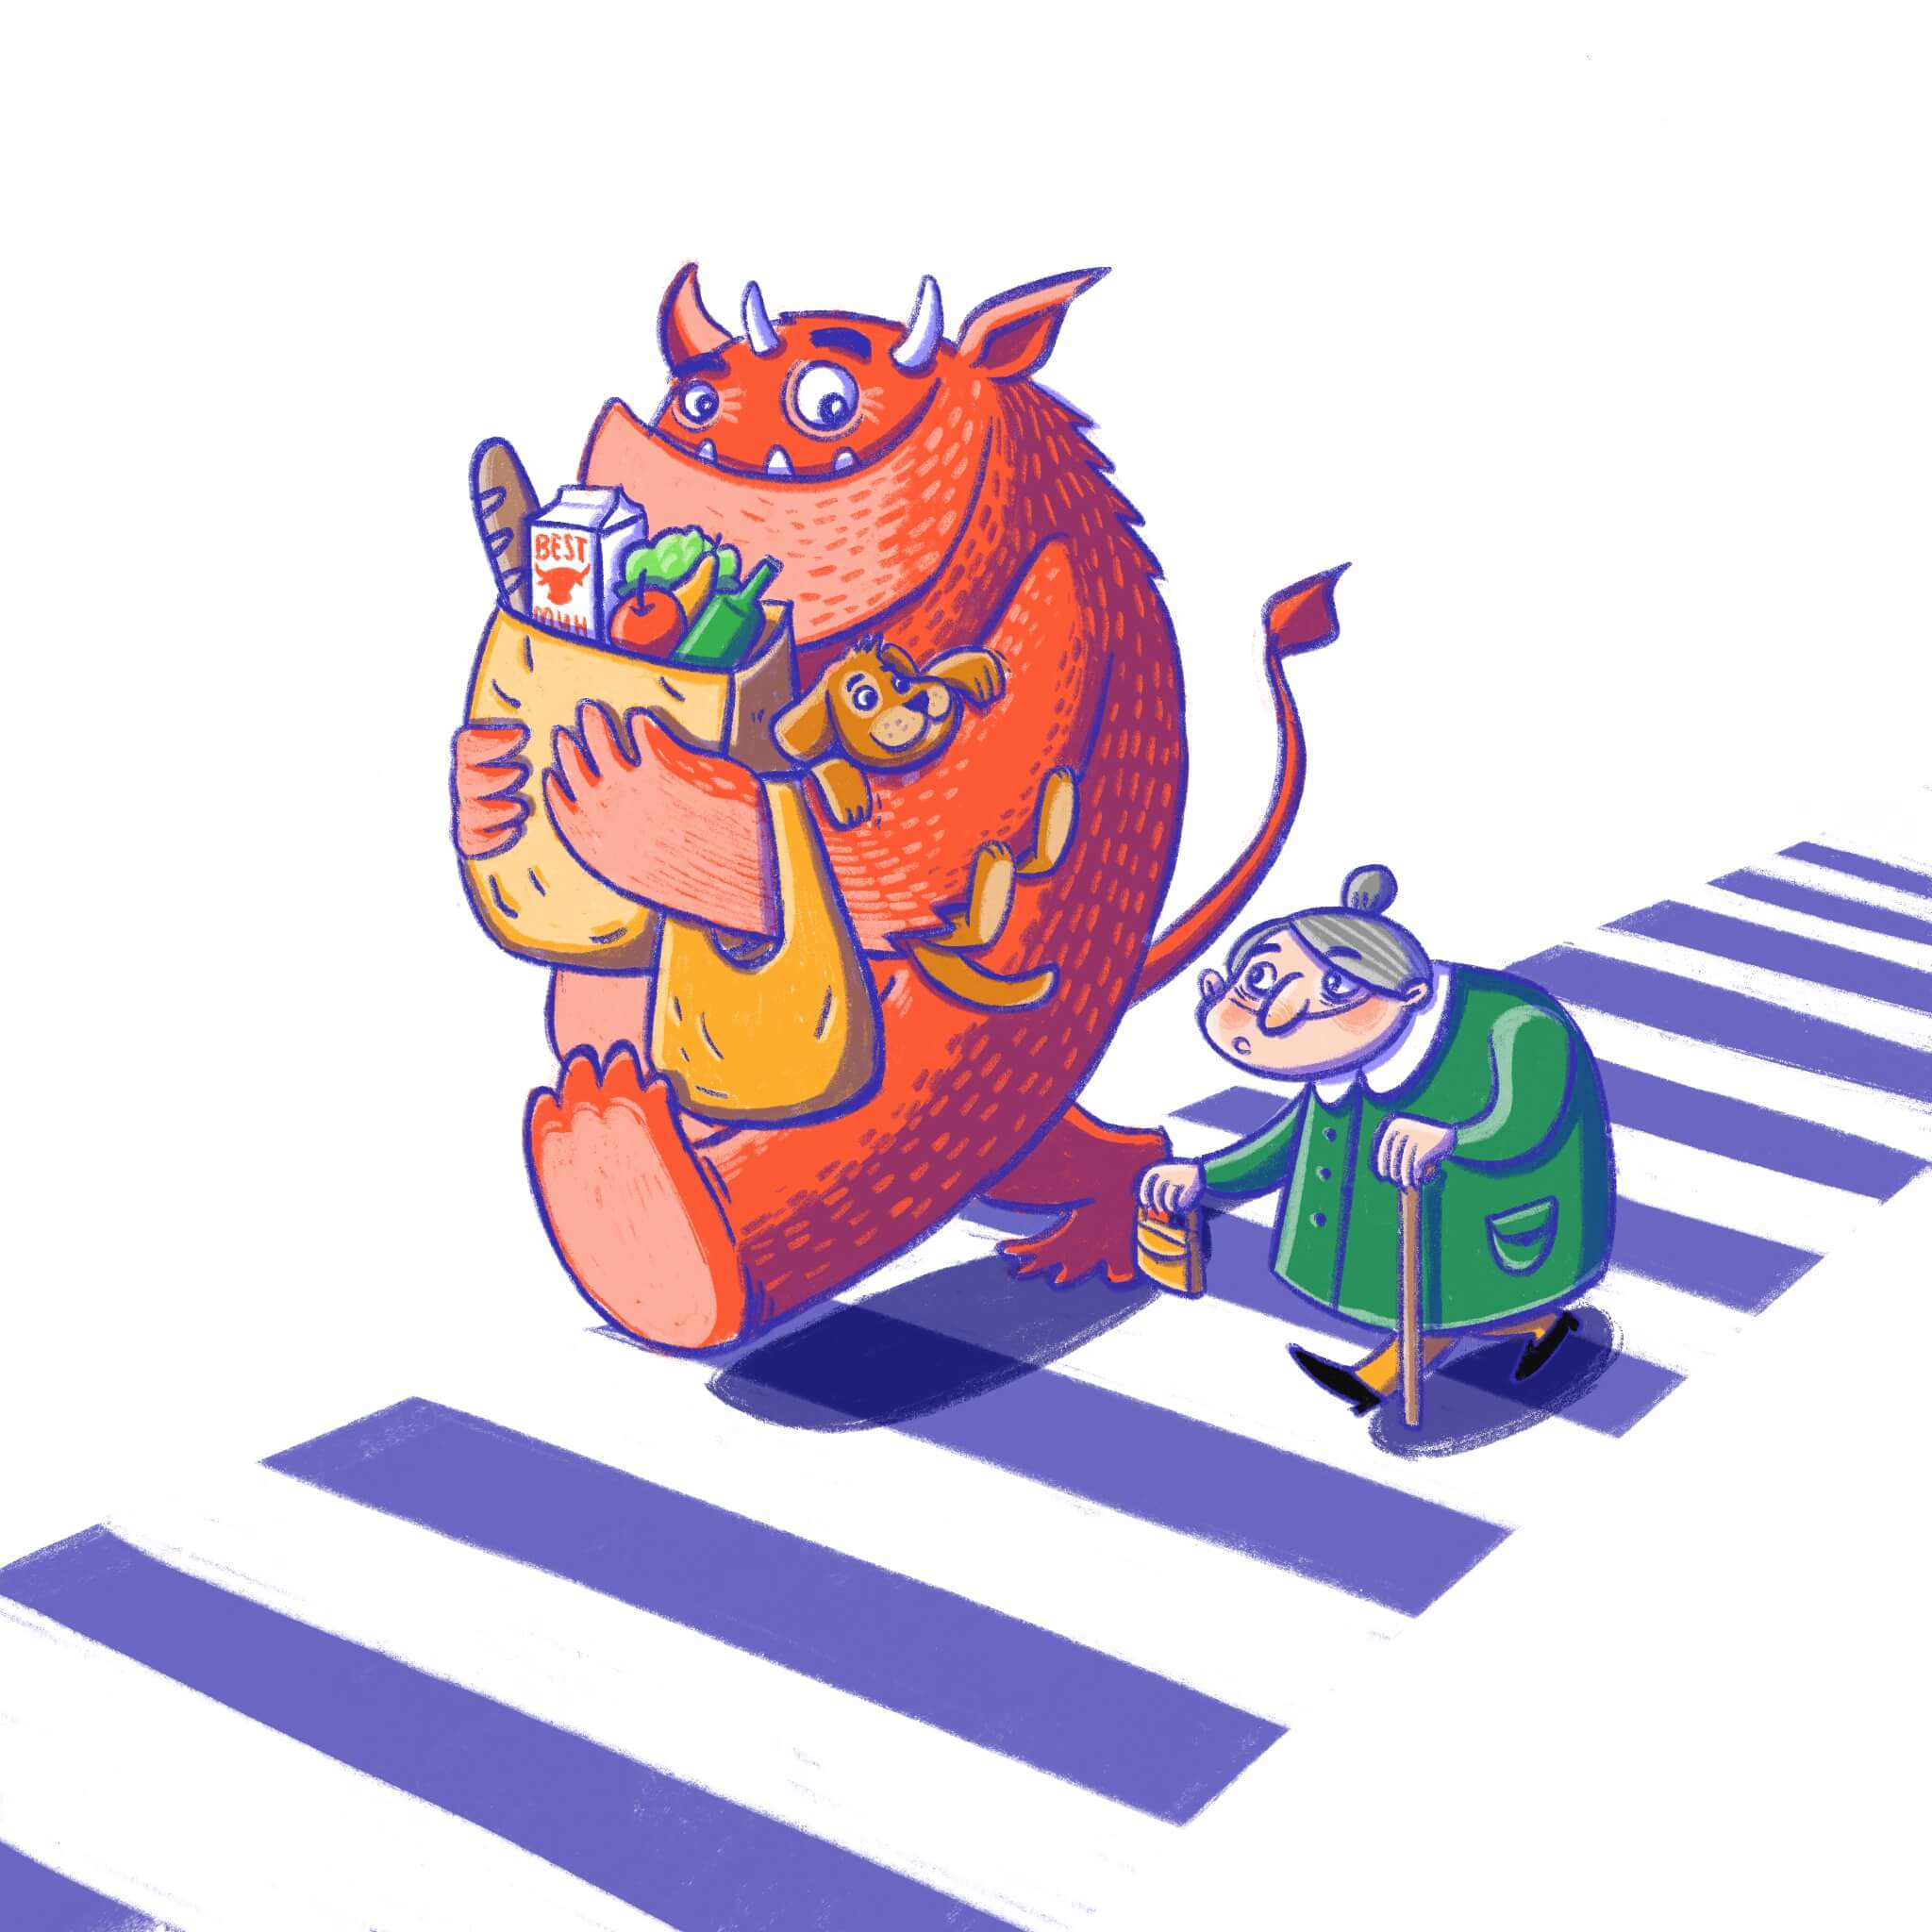 a monster hepls his granny crossing the street